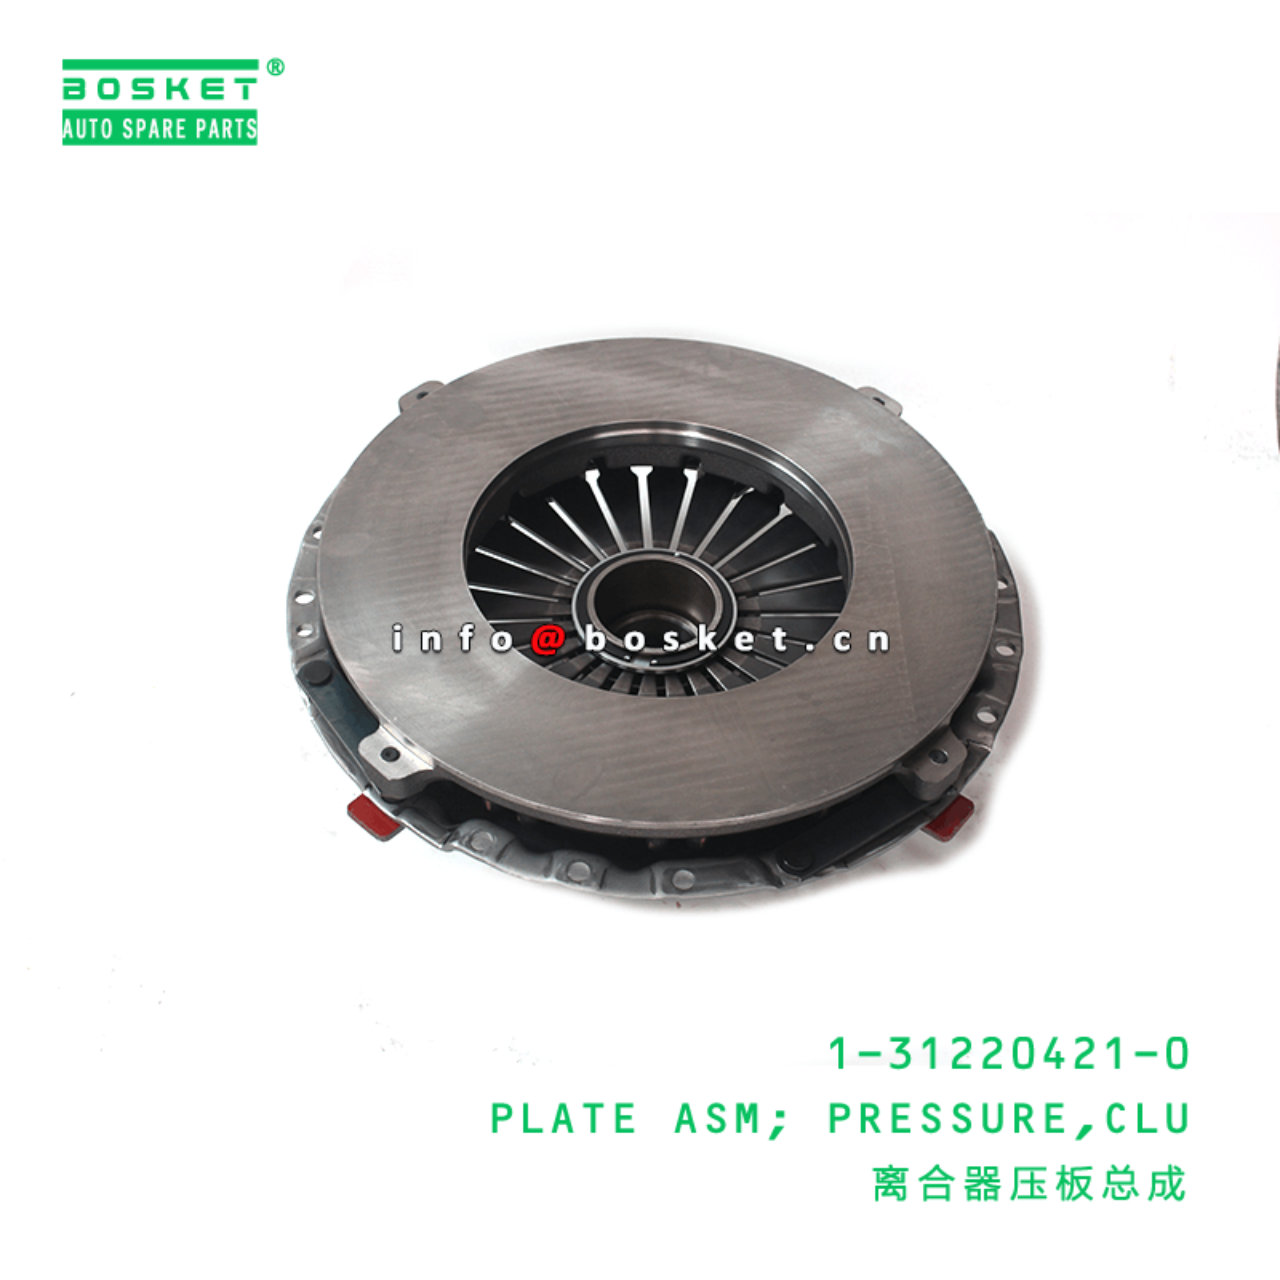 1-31220421-0 Clutch Pressure Plate Assembly 1312204210 Suitable for ISUZU F Series Truck